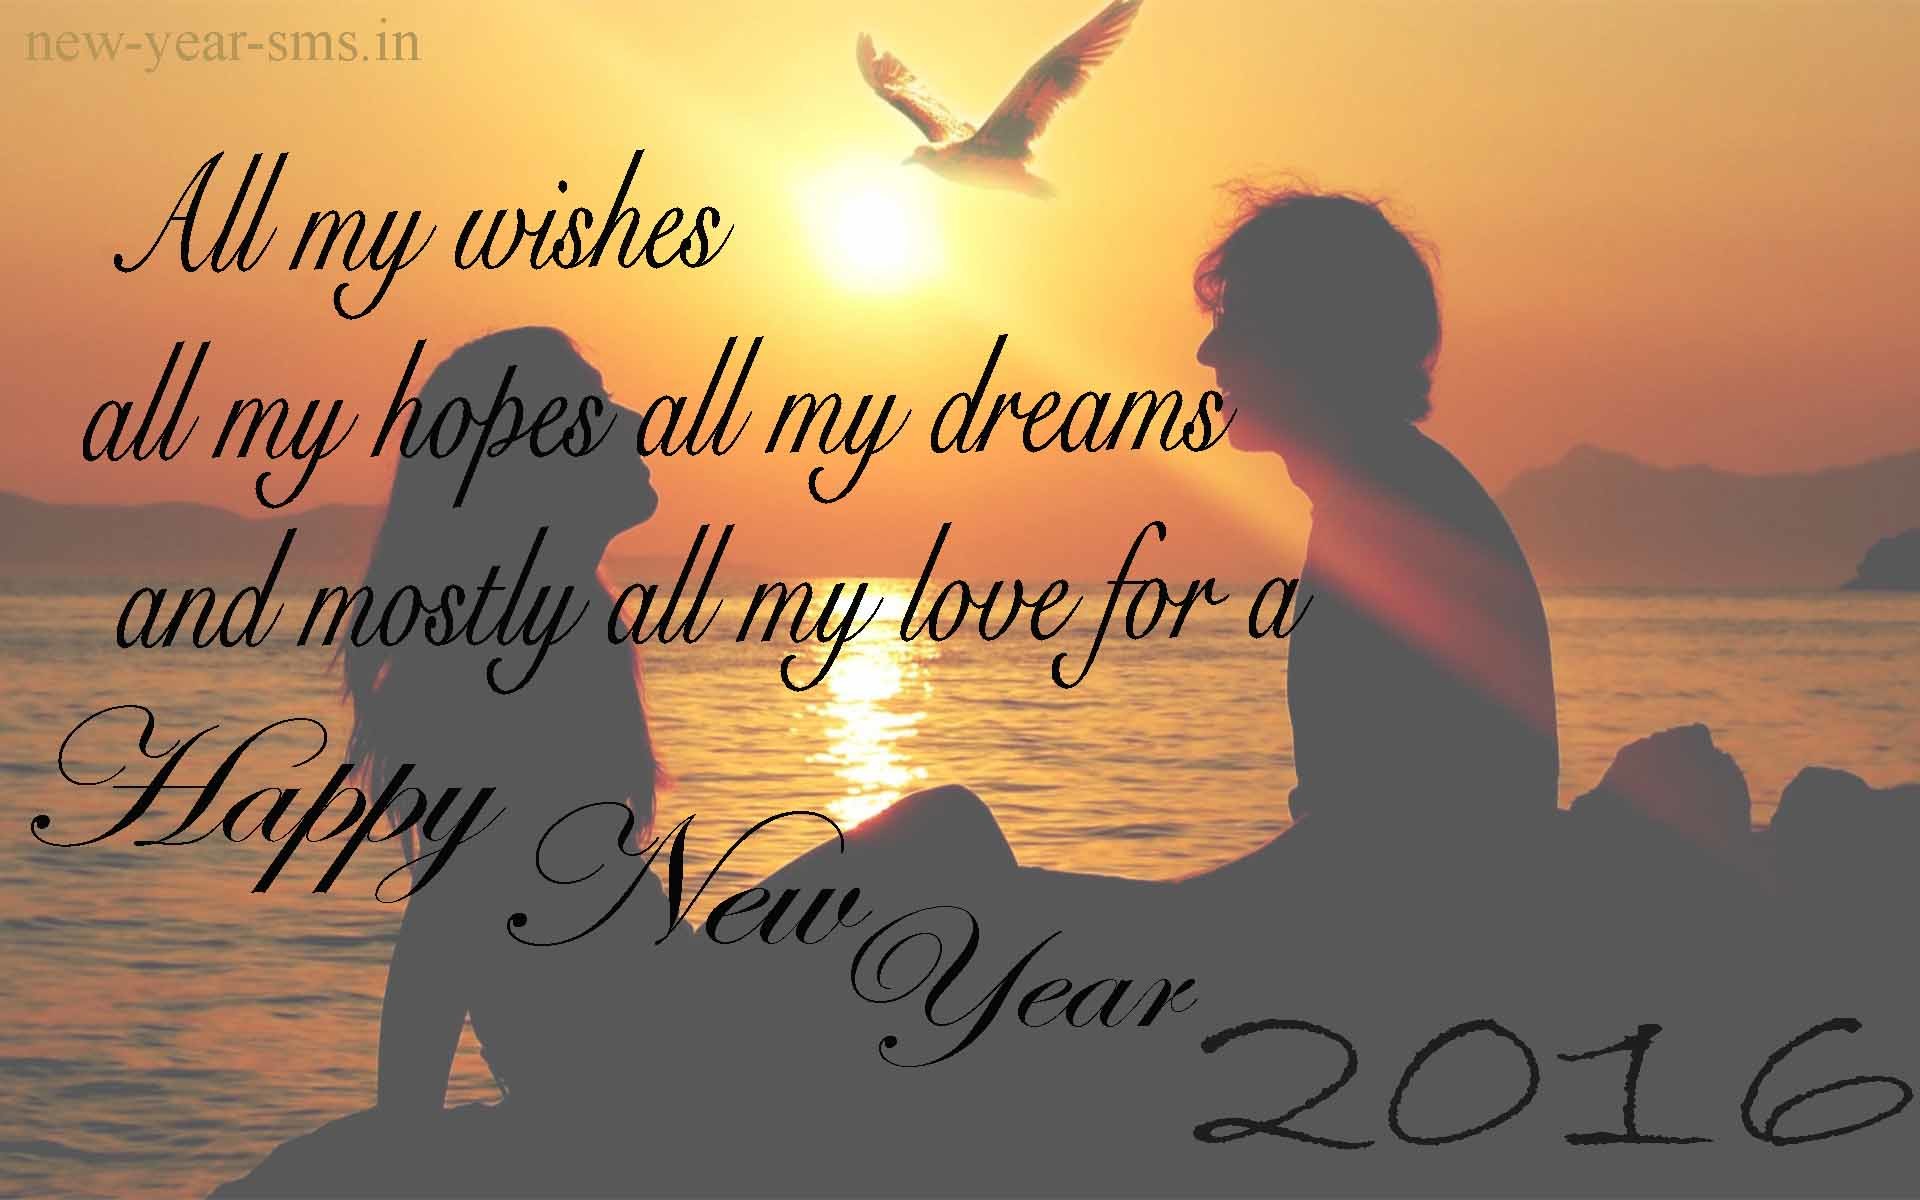 Happy New Year Love Poem Wallpapers - Poem New Year Love - HD Wallpaper 